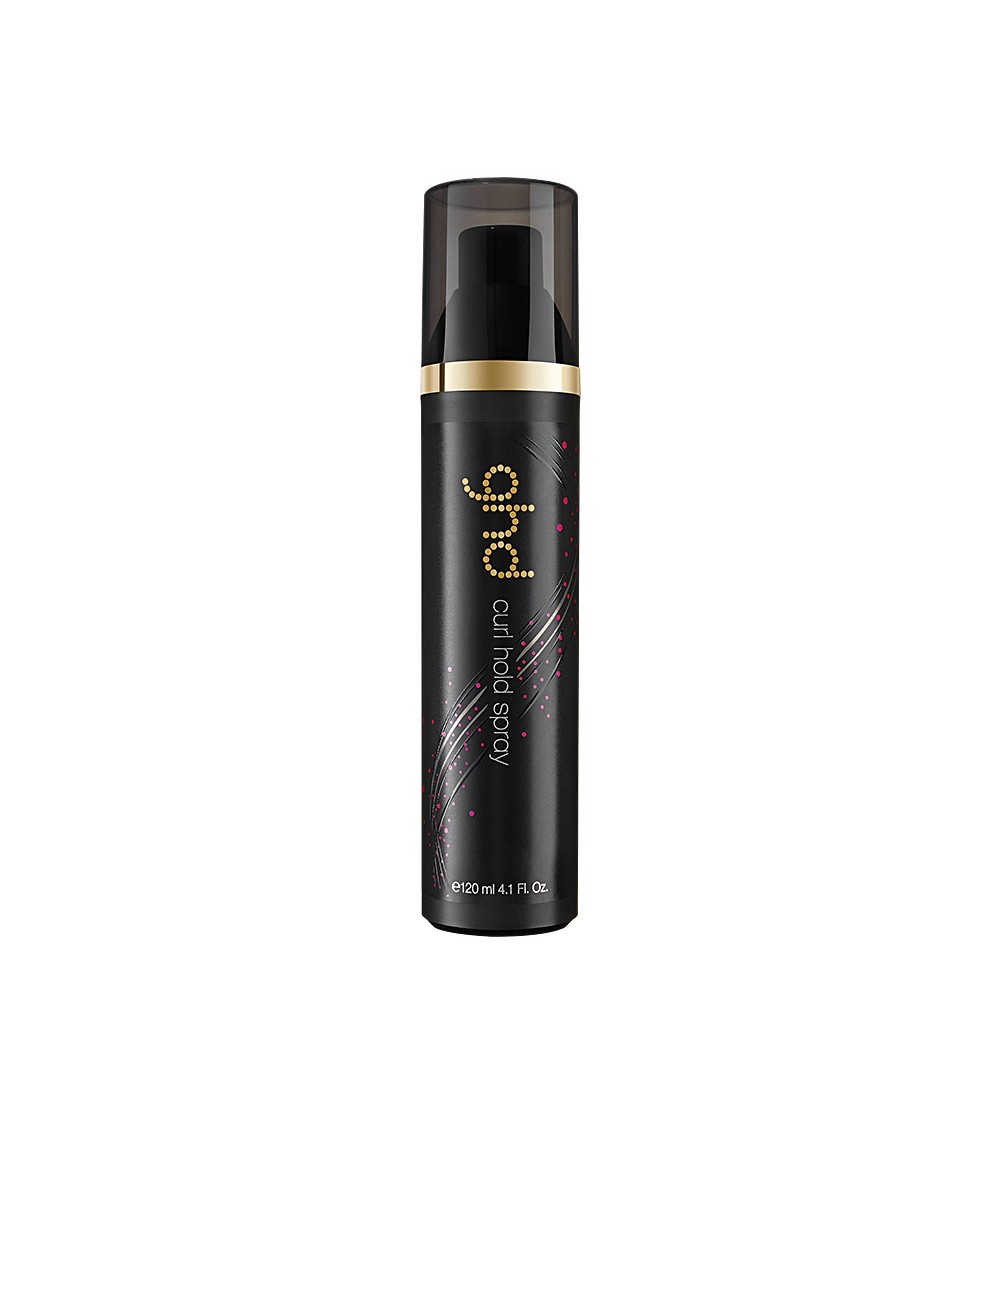 GHD STYLE curly ever after 120 ml NE35764